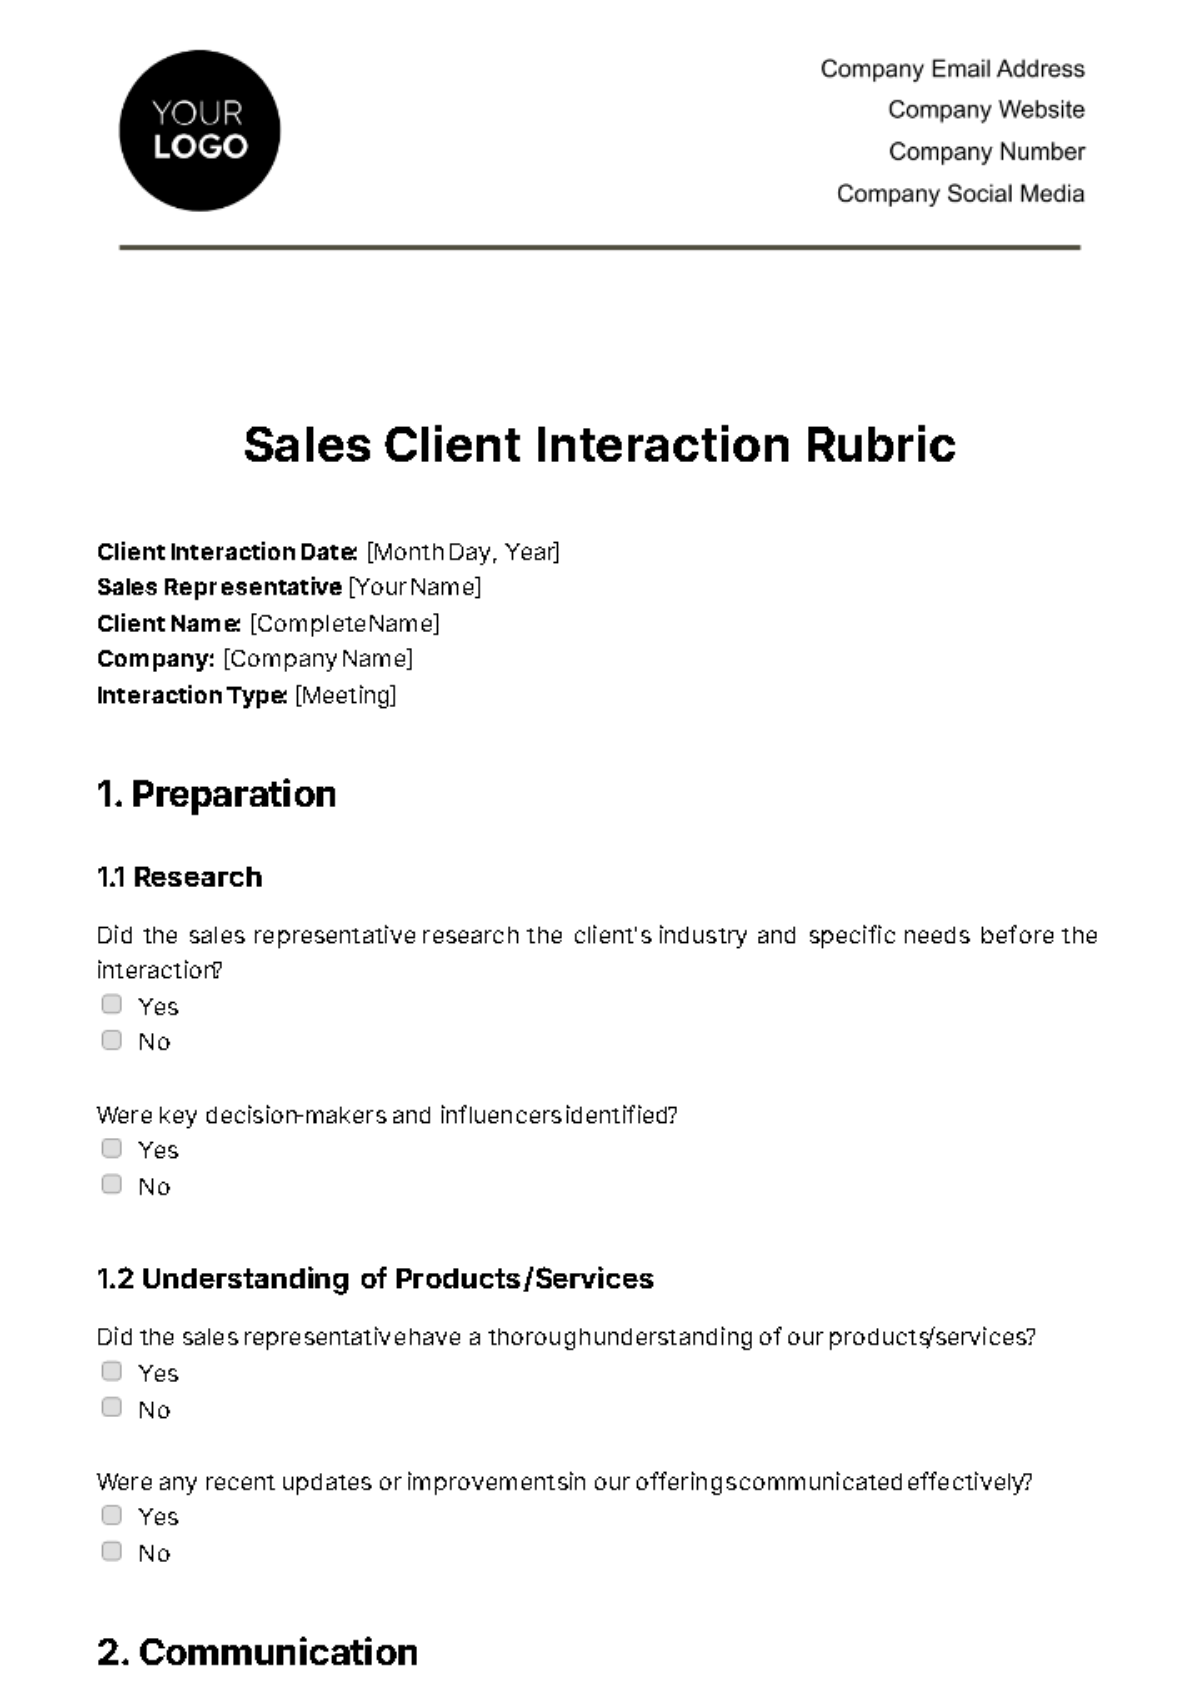 Sales Client Interaction Rubric Template